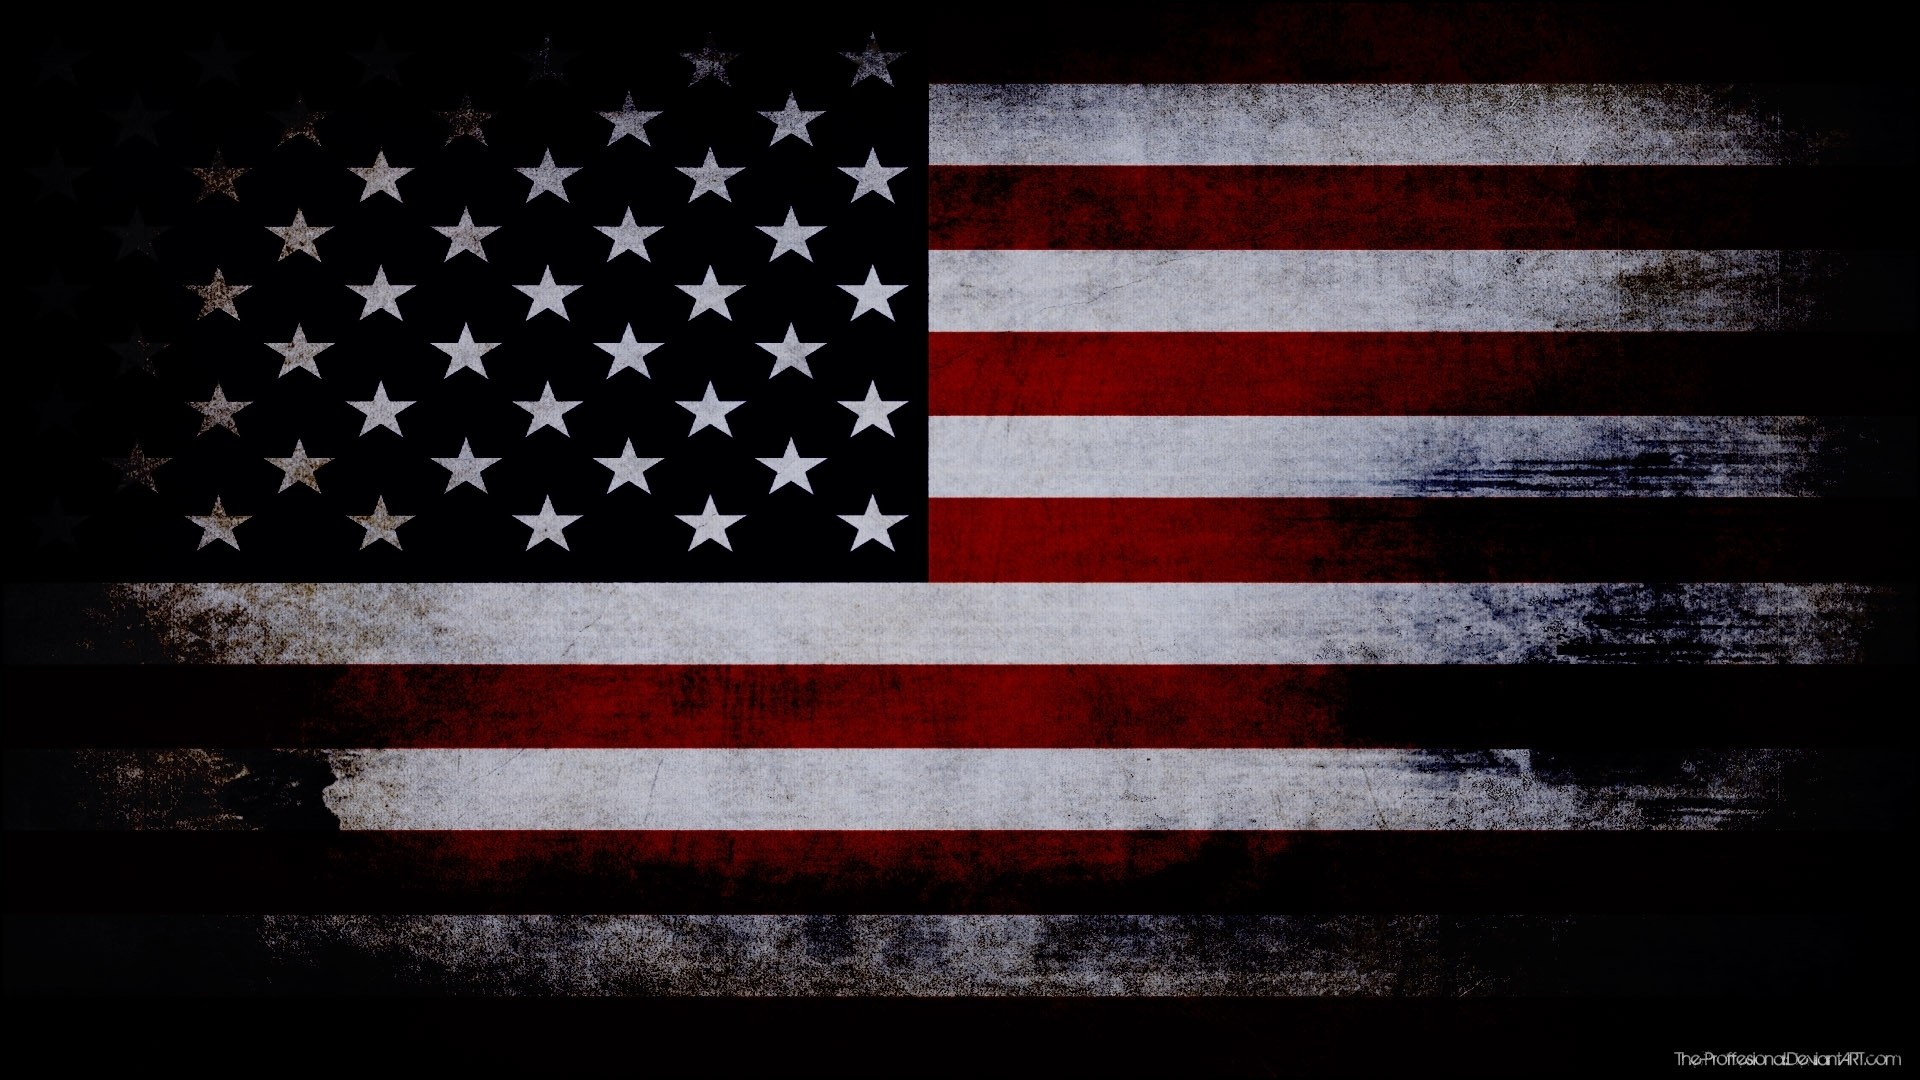 1920x1080 March 20 2013 at 1920 1080 in old american flag wallpaper 